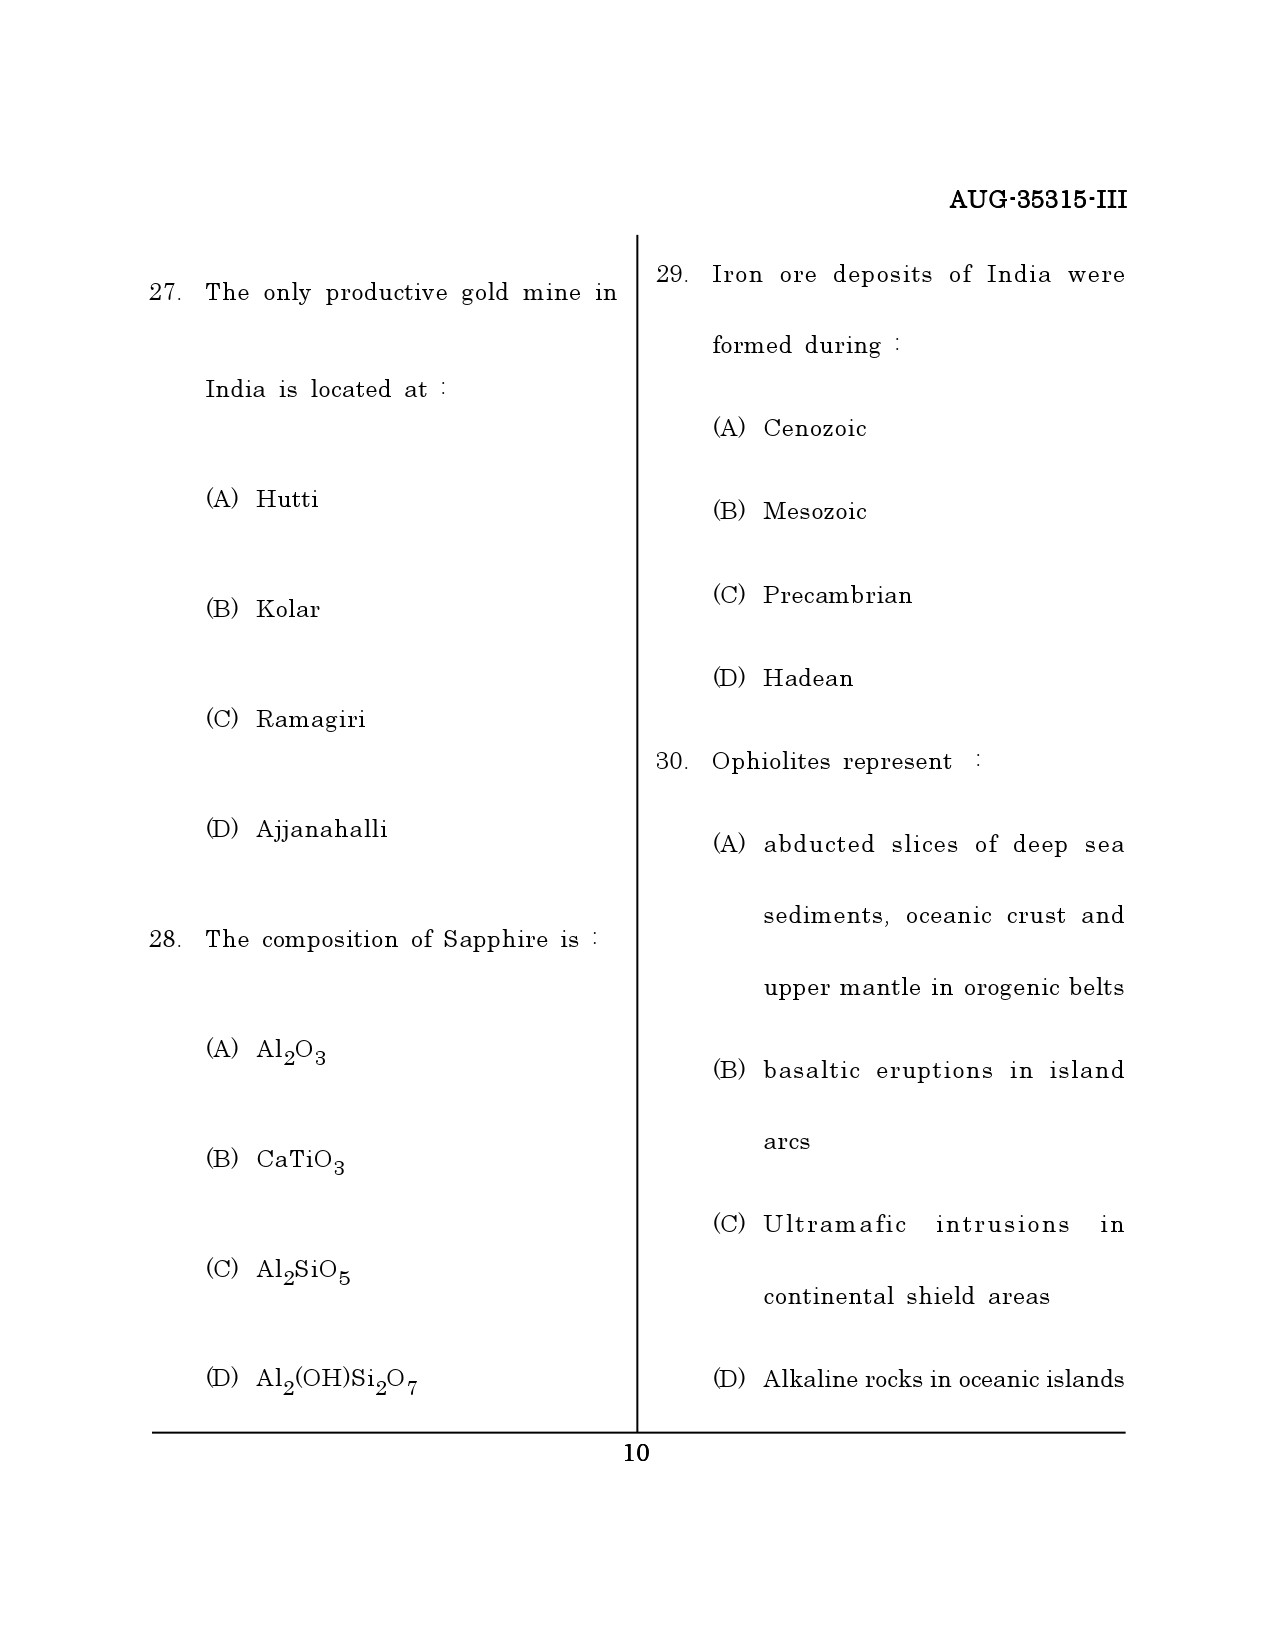 Maharashtra SET Earth Atmospheric Ocean Planetary Science Question Paper III August 2015 9